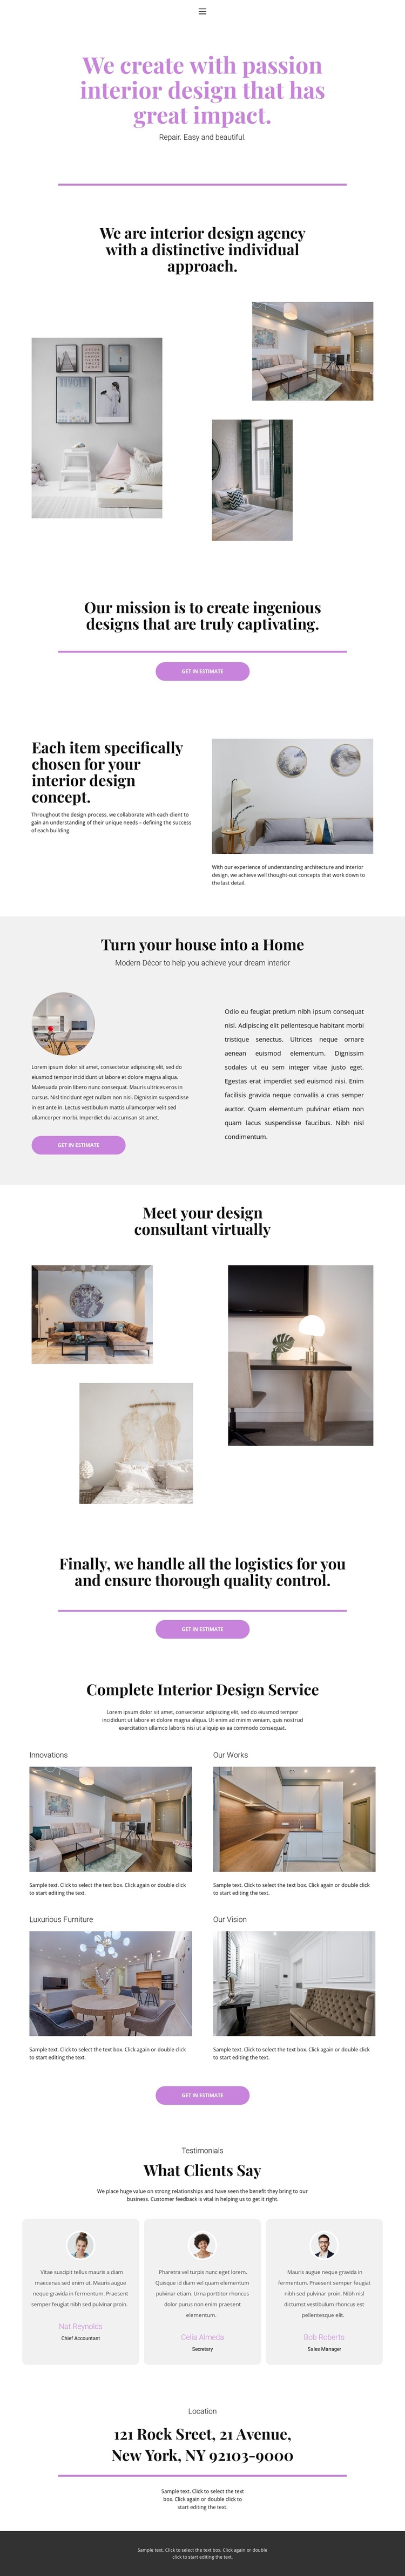 Choice of design for the house Joomla Template